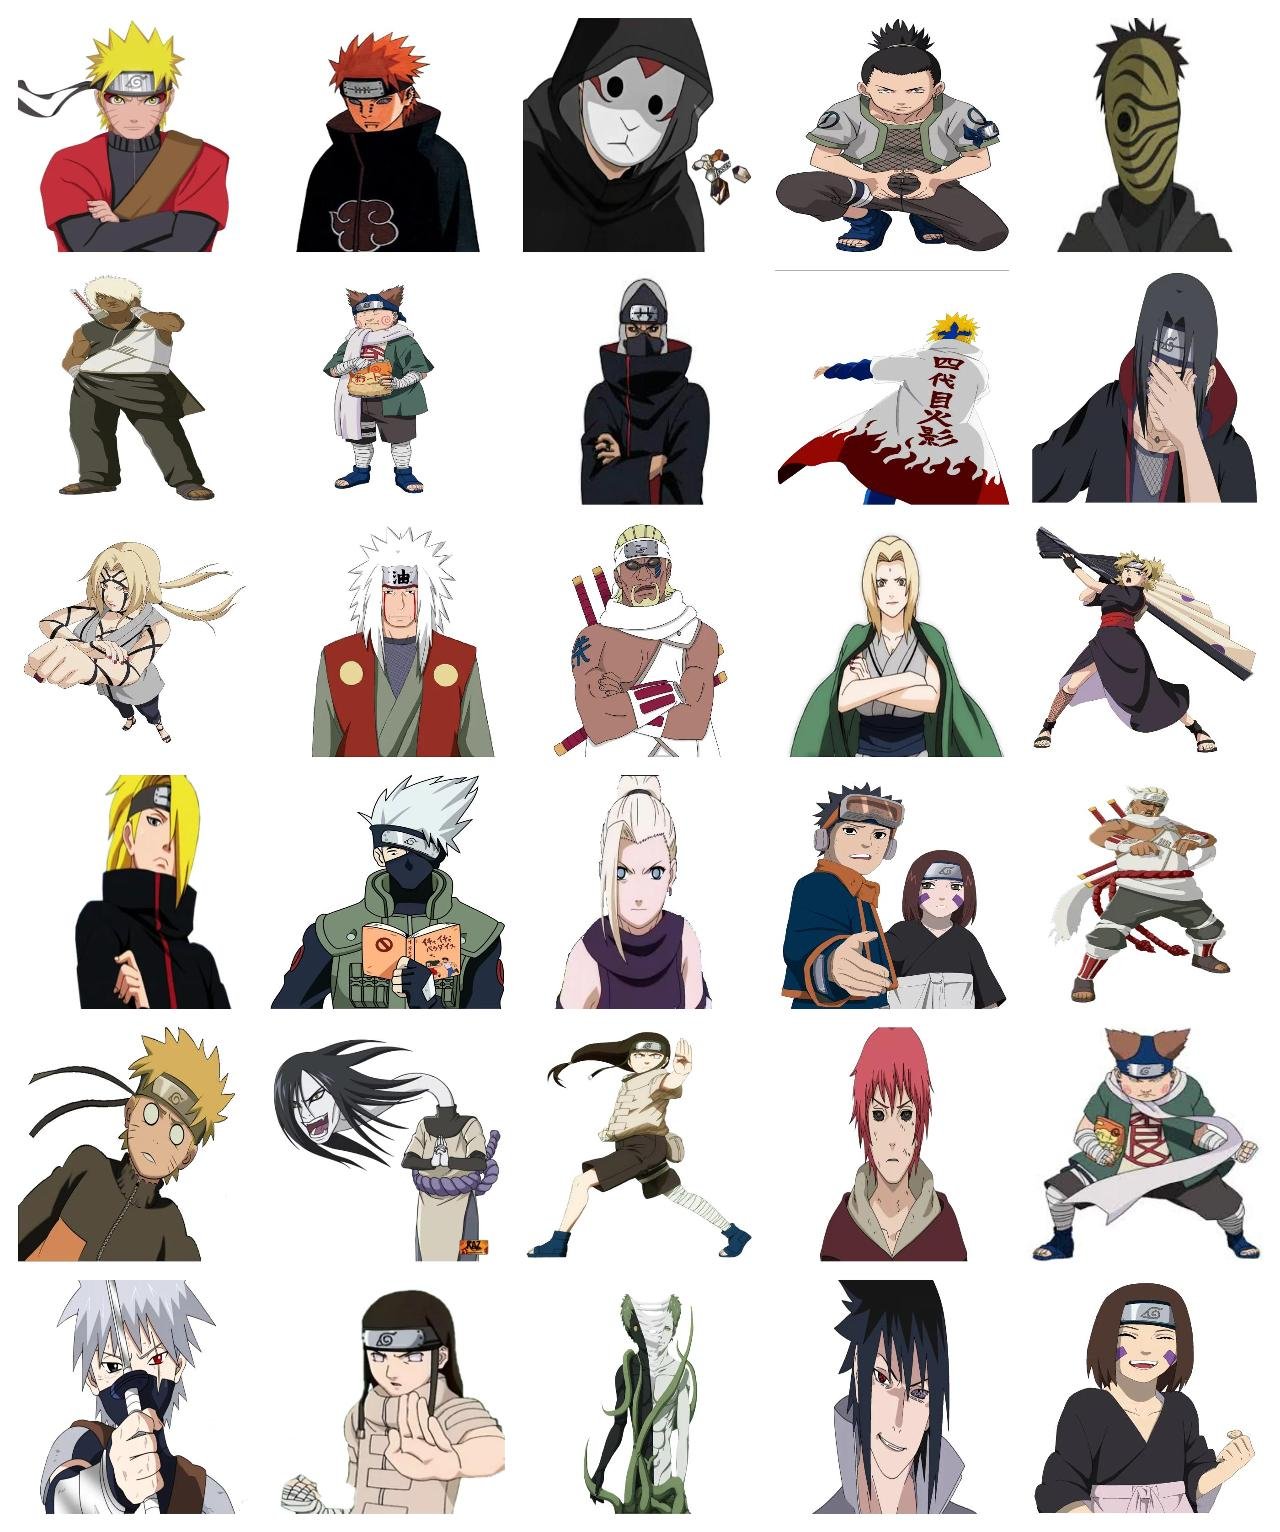 Naruto #4 Naruto sticker pack for Whatsapp, Telegram, Signal, and others chatting and message apps